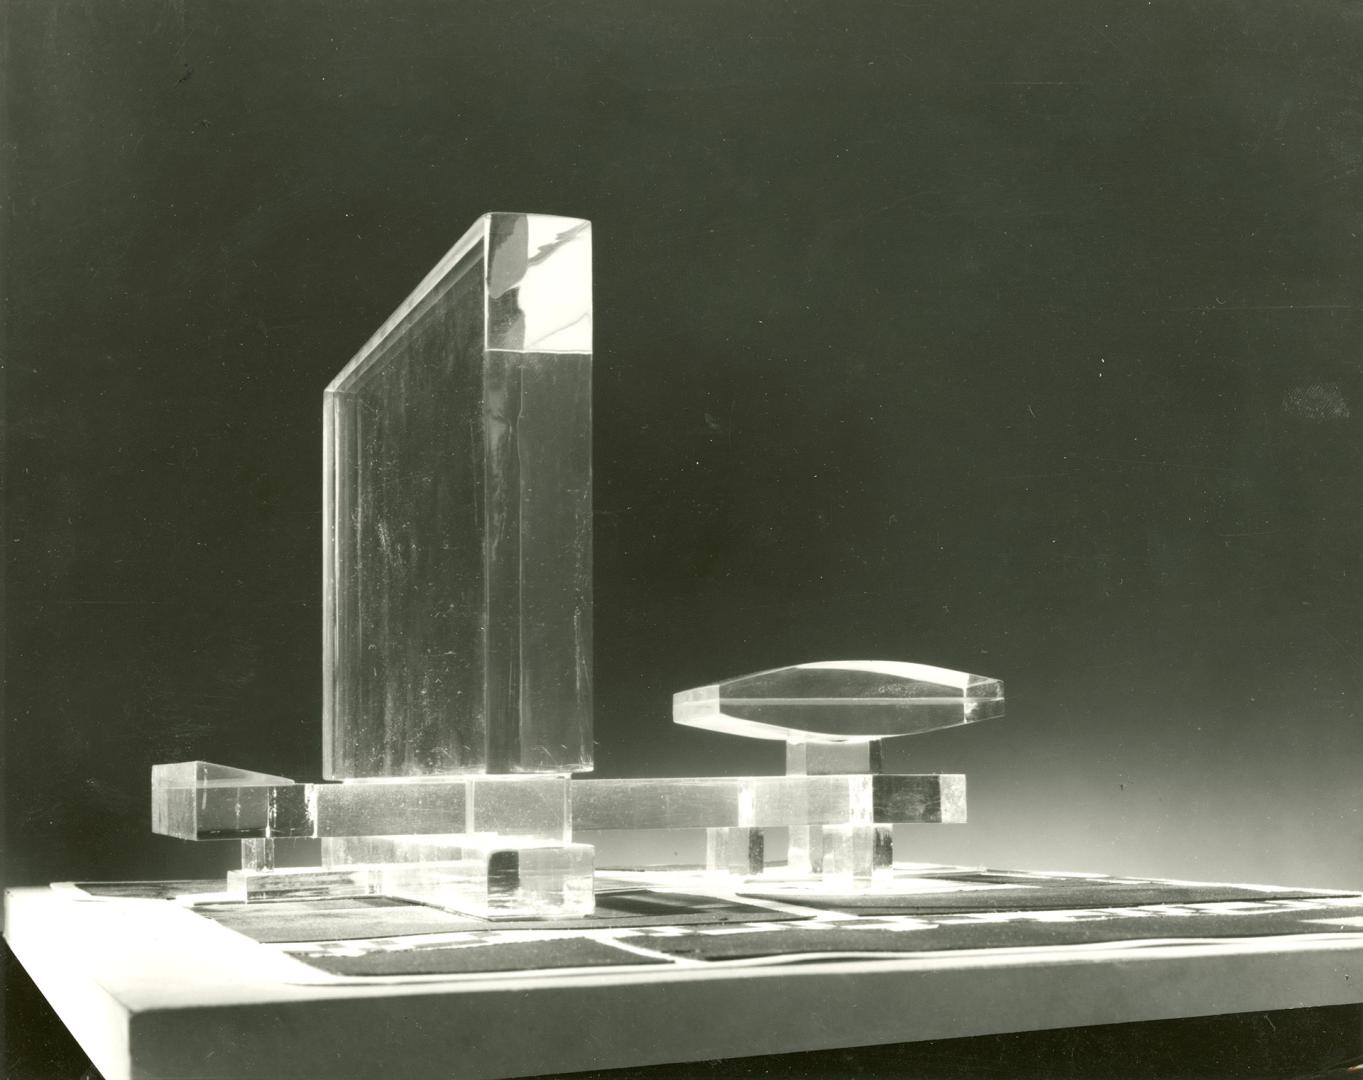 Groupe Forum entry, City Hall and Square Competition, Toronto, 1958, architectural model